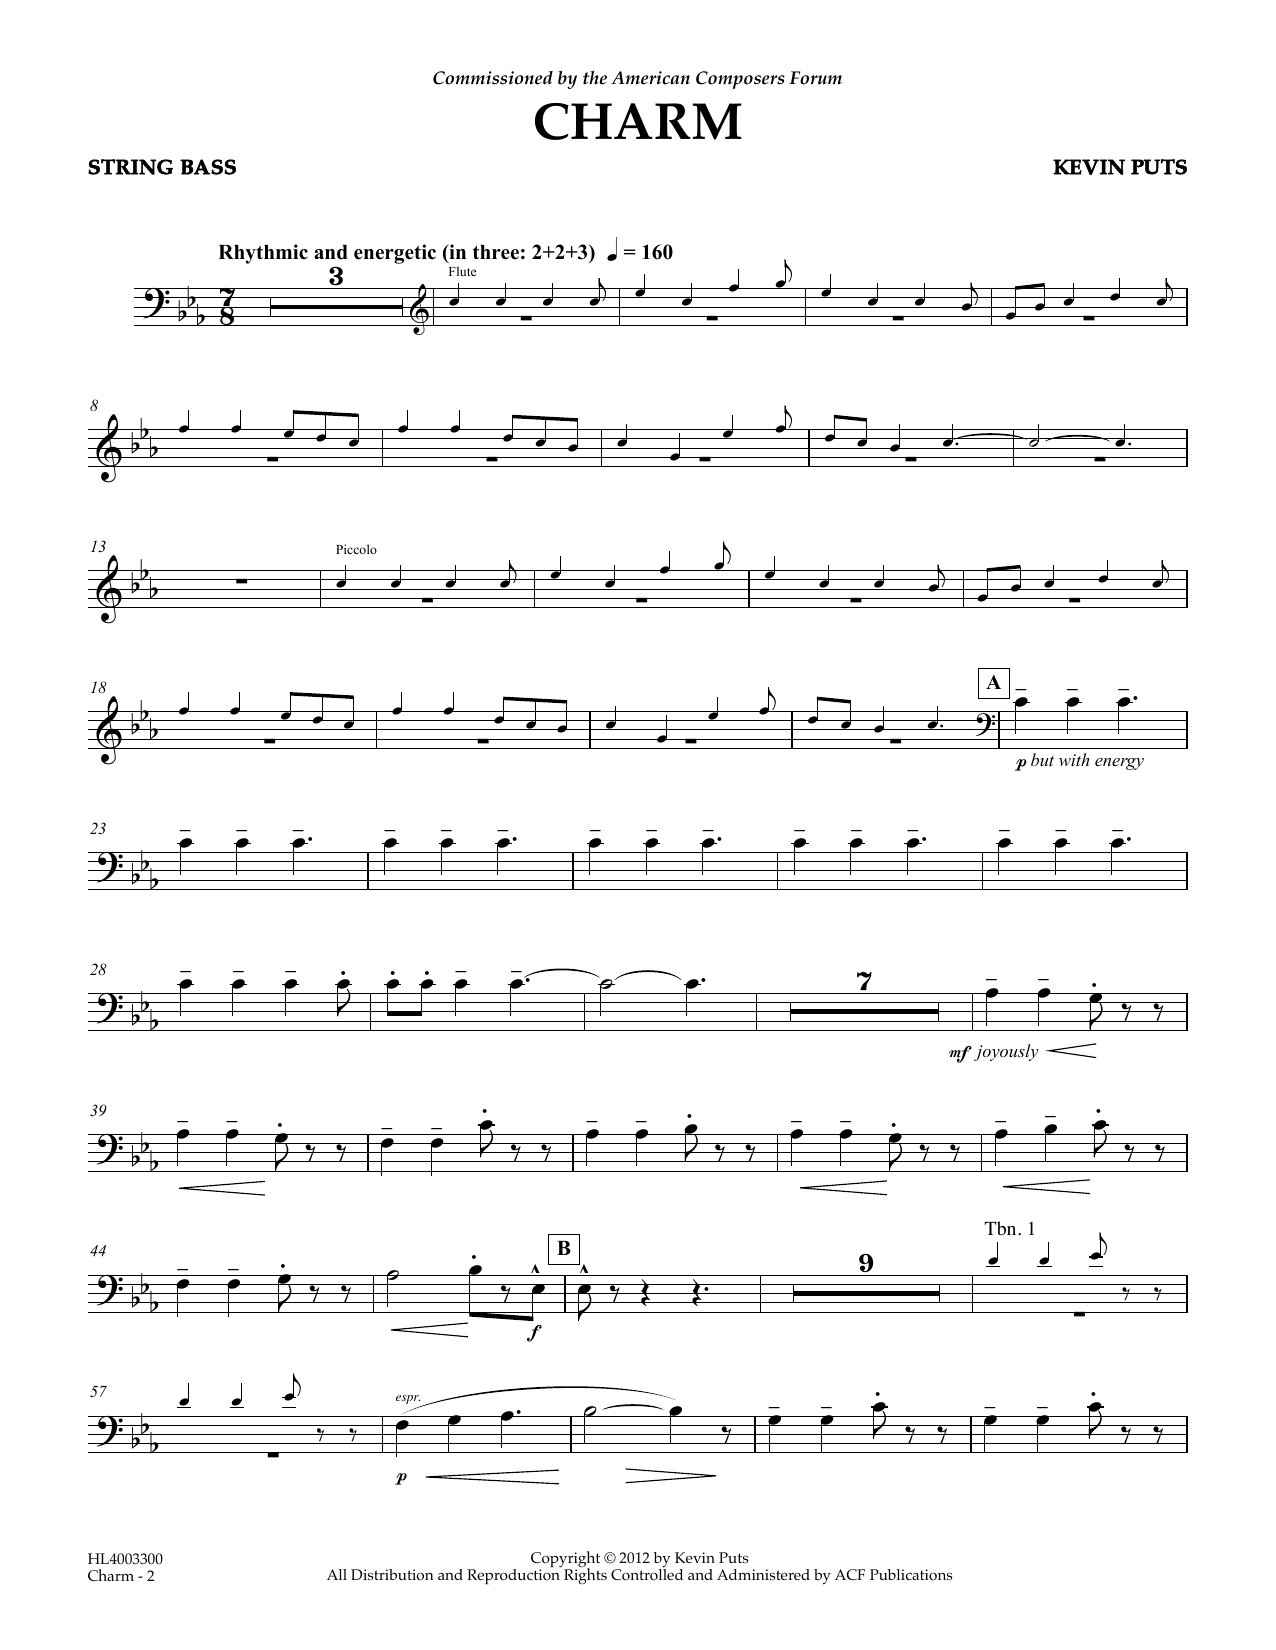 Download Kevin Puts Charm - String Bass Sheet Music